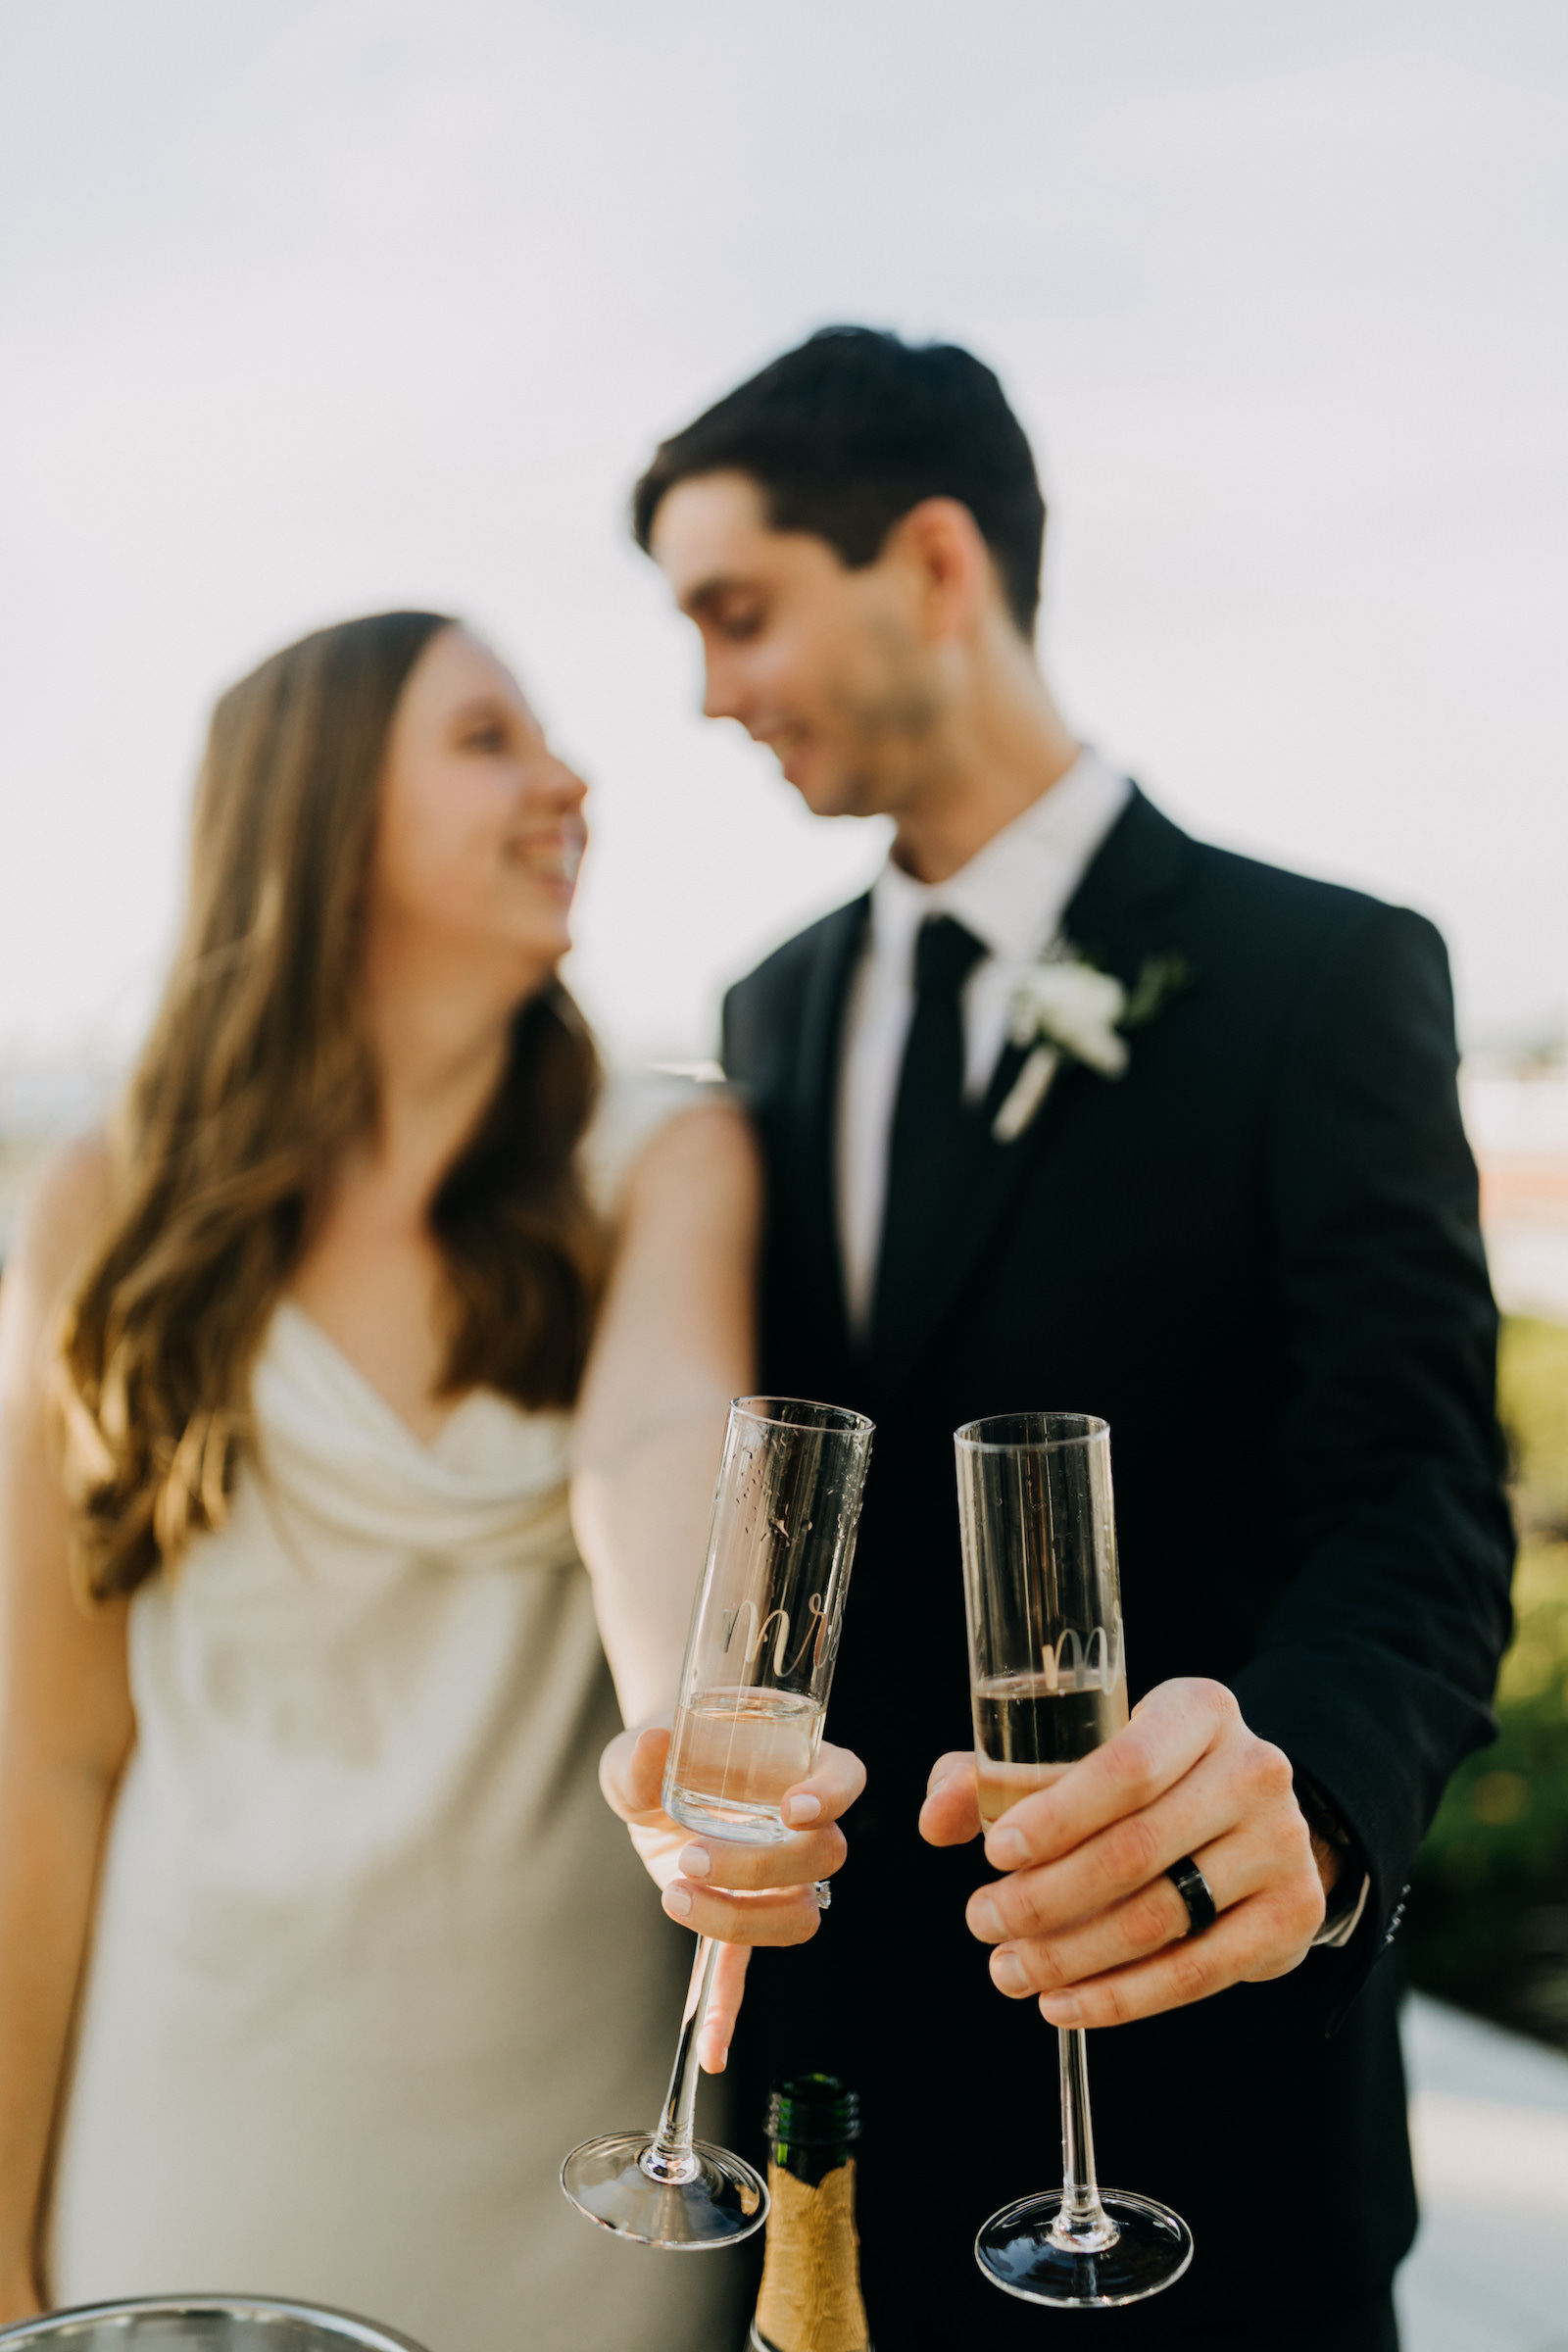 Bride and Groom Holding Champagne Flutes | Wedding Photographer Amber McWhorter | Wedding Planner Elope Tampa Bay